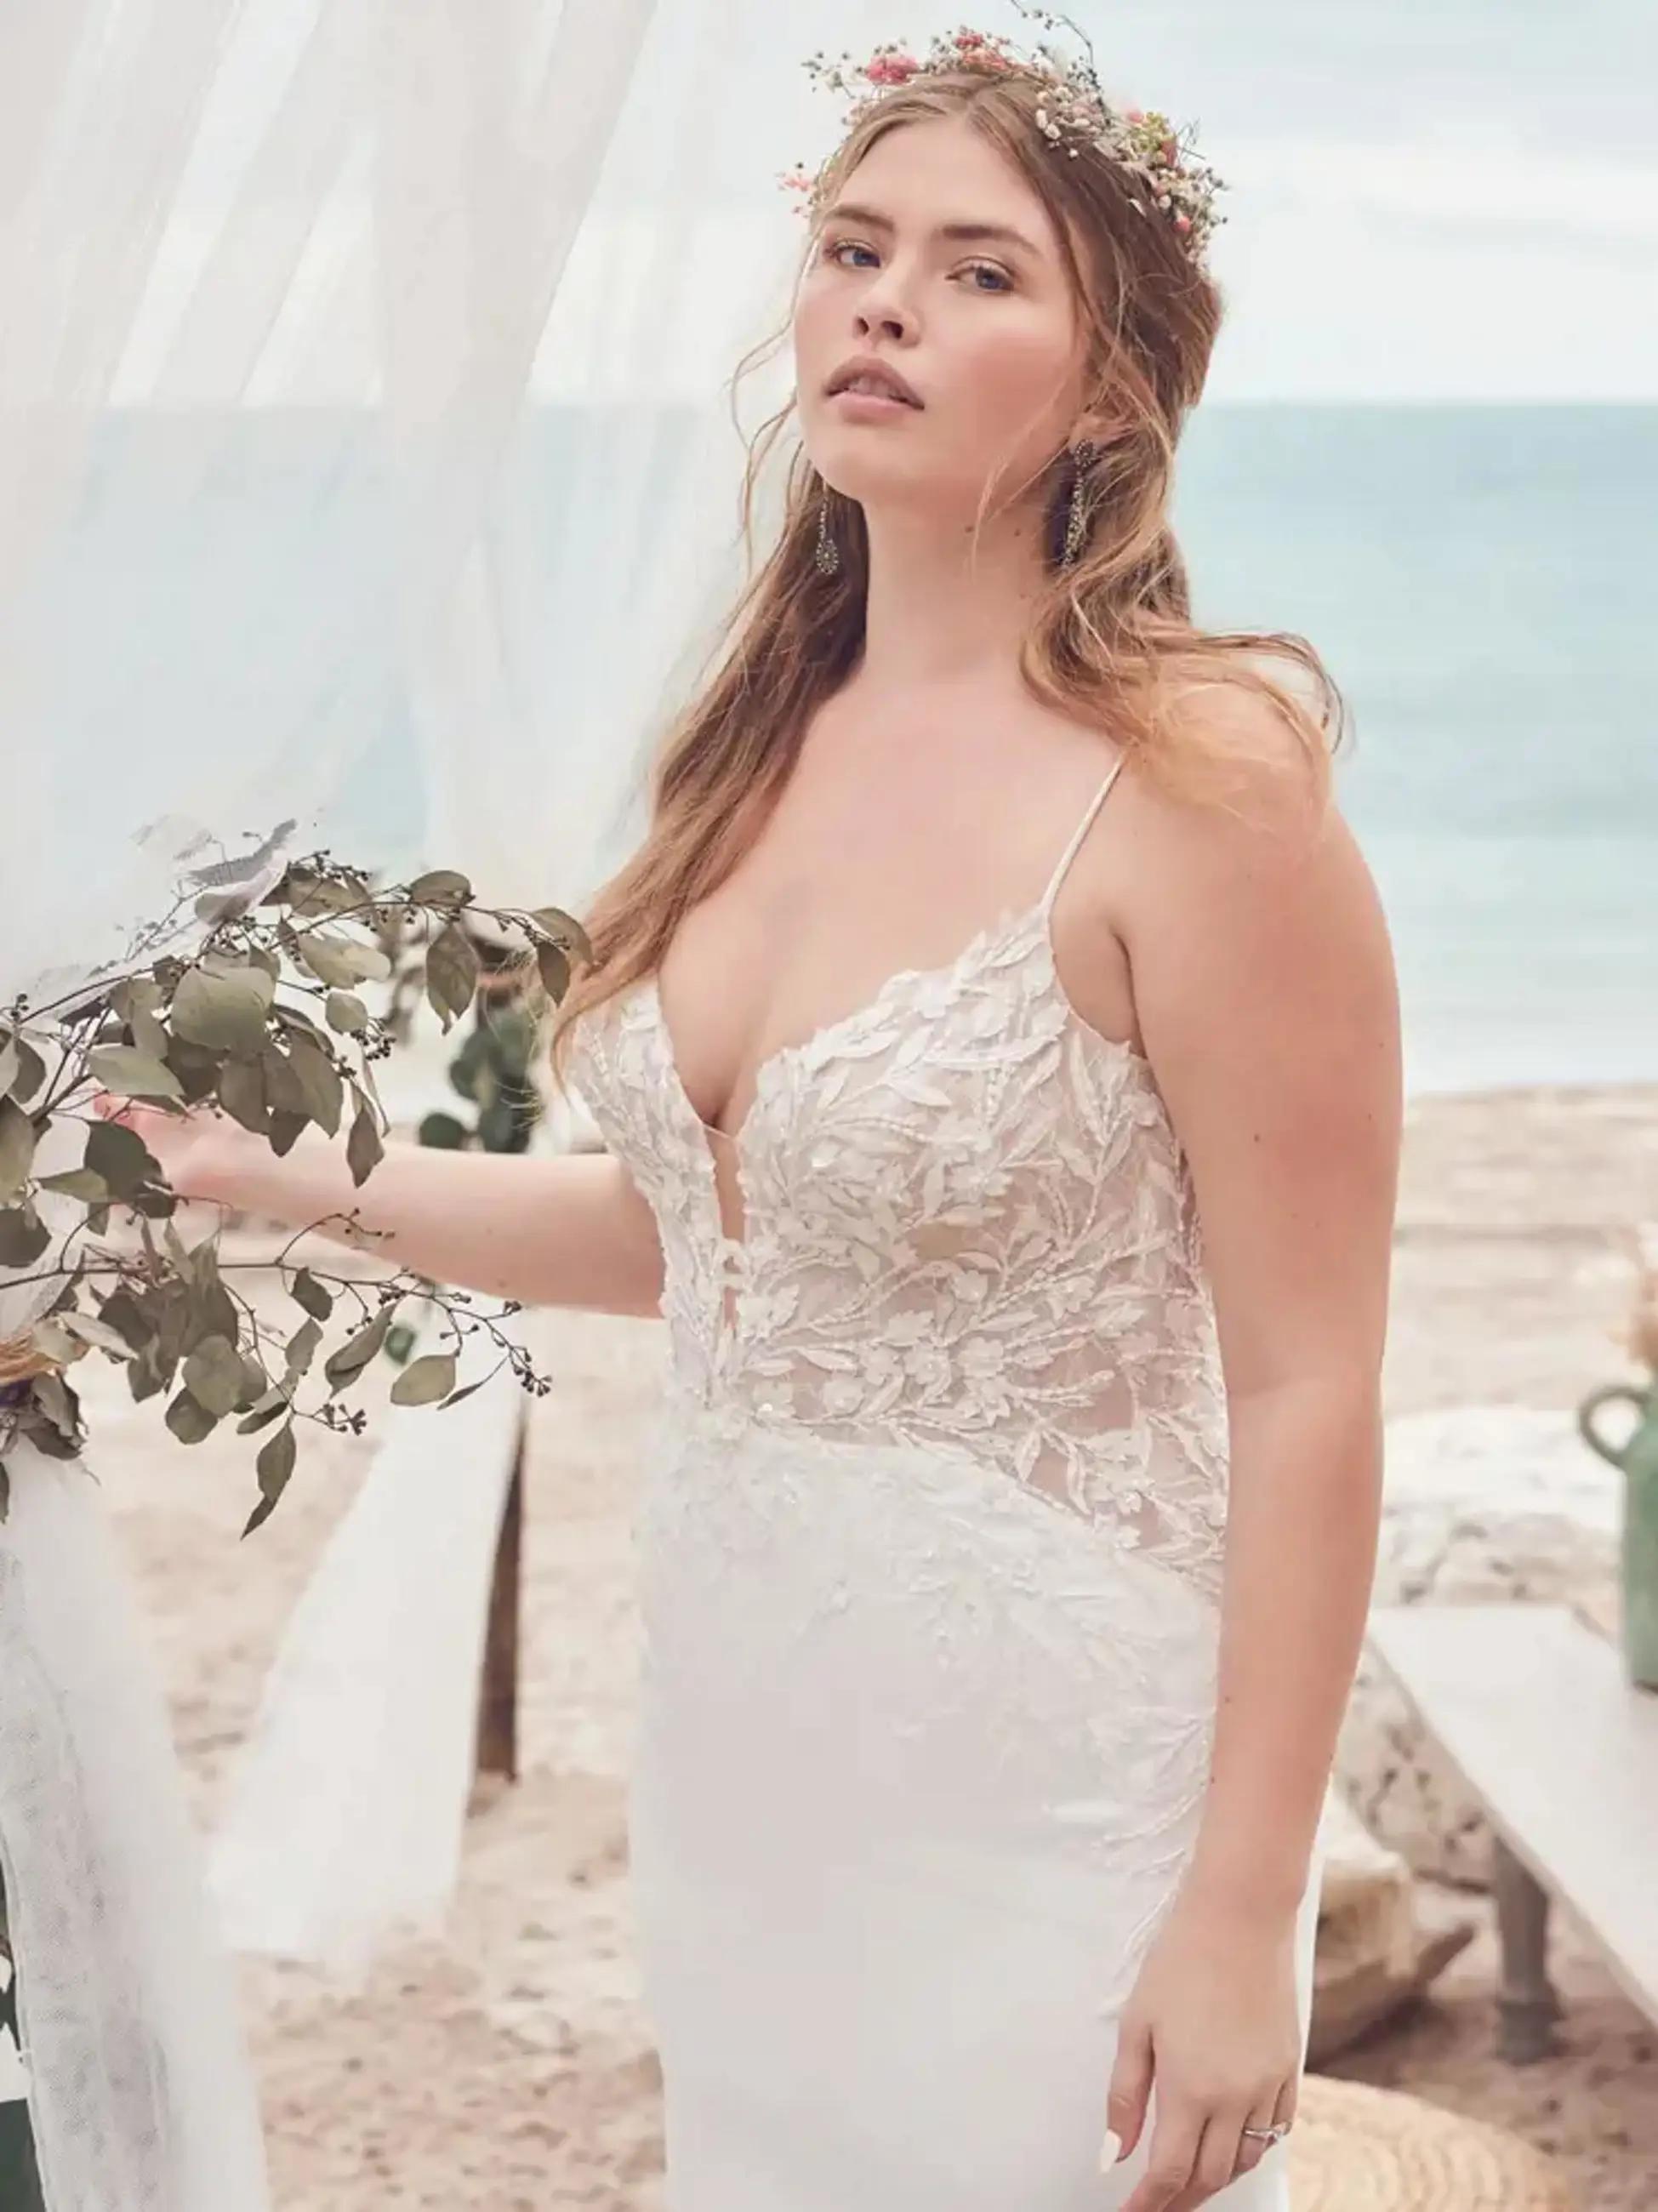 Tropical Vibes: Styling Tips for a Summer Beach Wedding Image